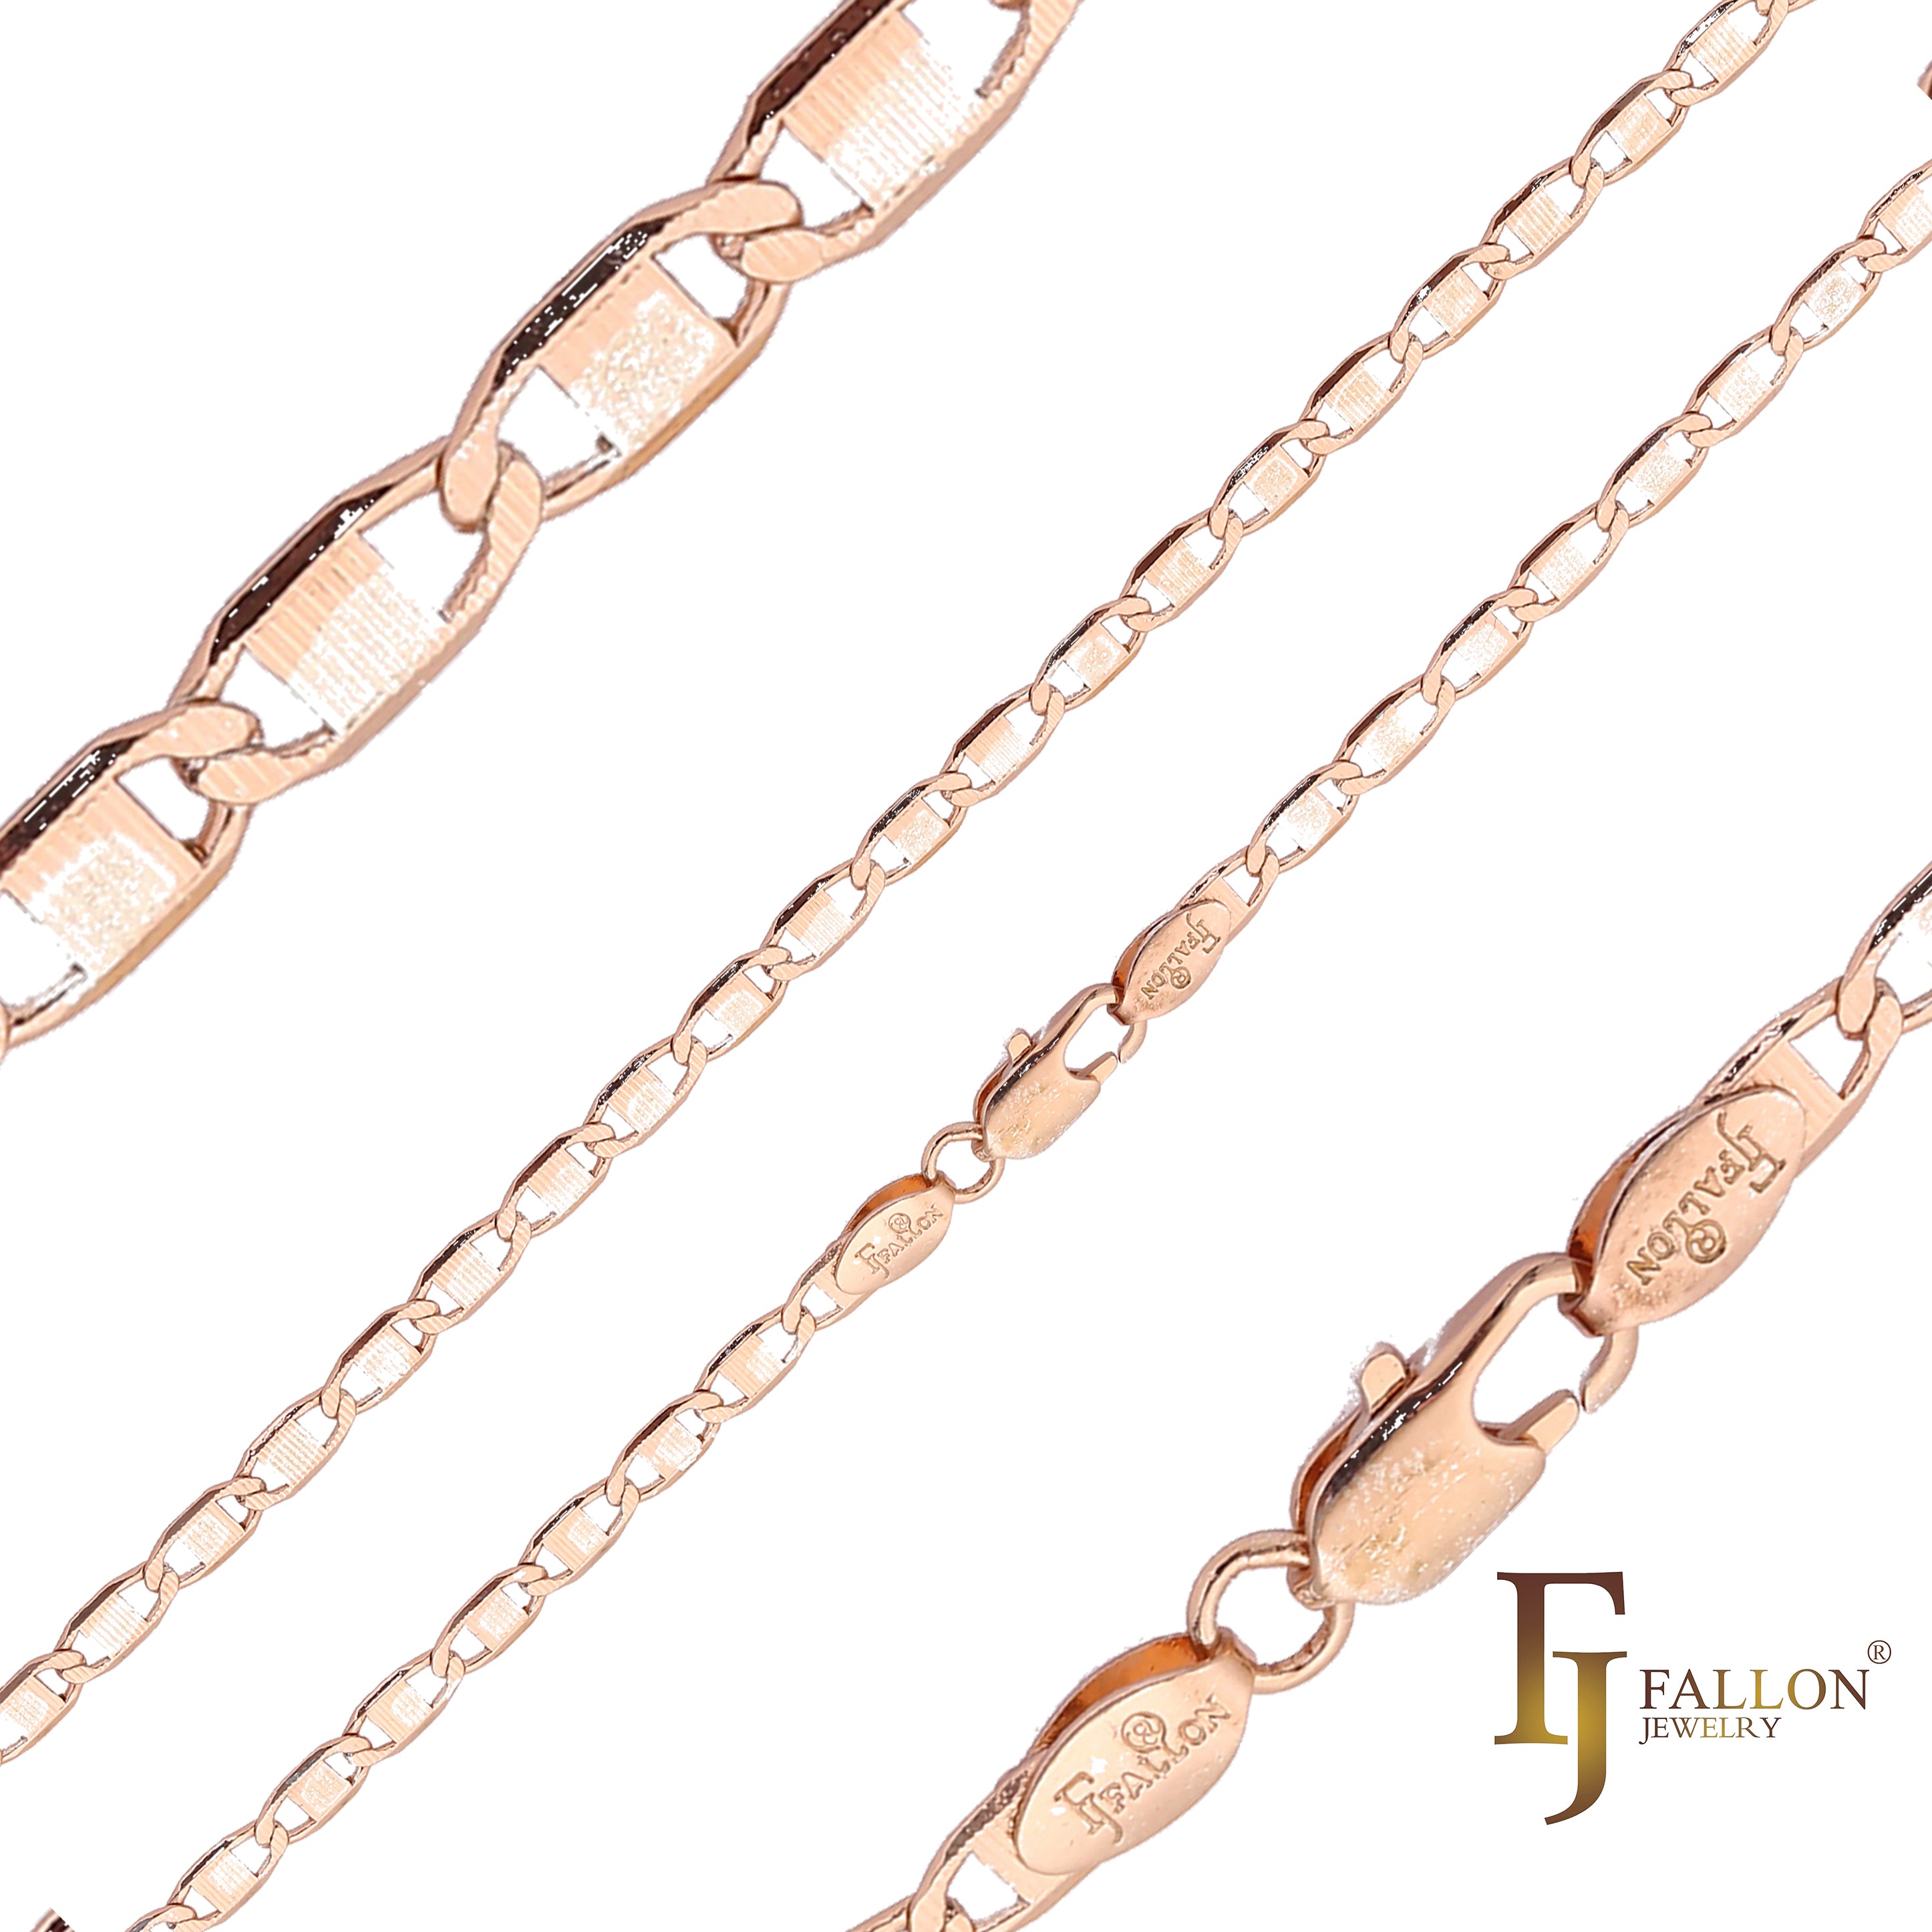 Mariner link band hammered chains plated in 14K Gold, Rose Gold, 18K Gold